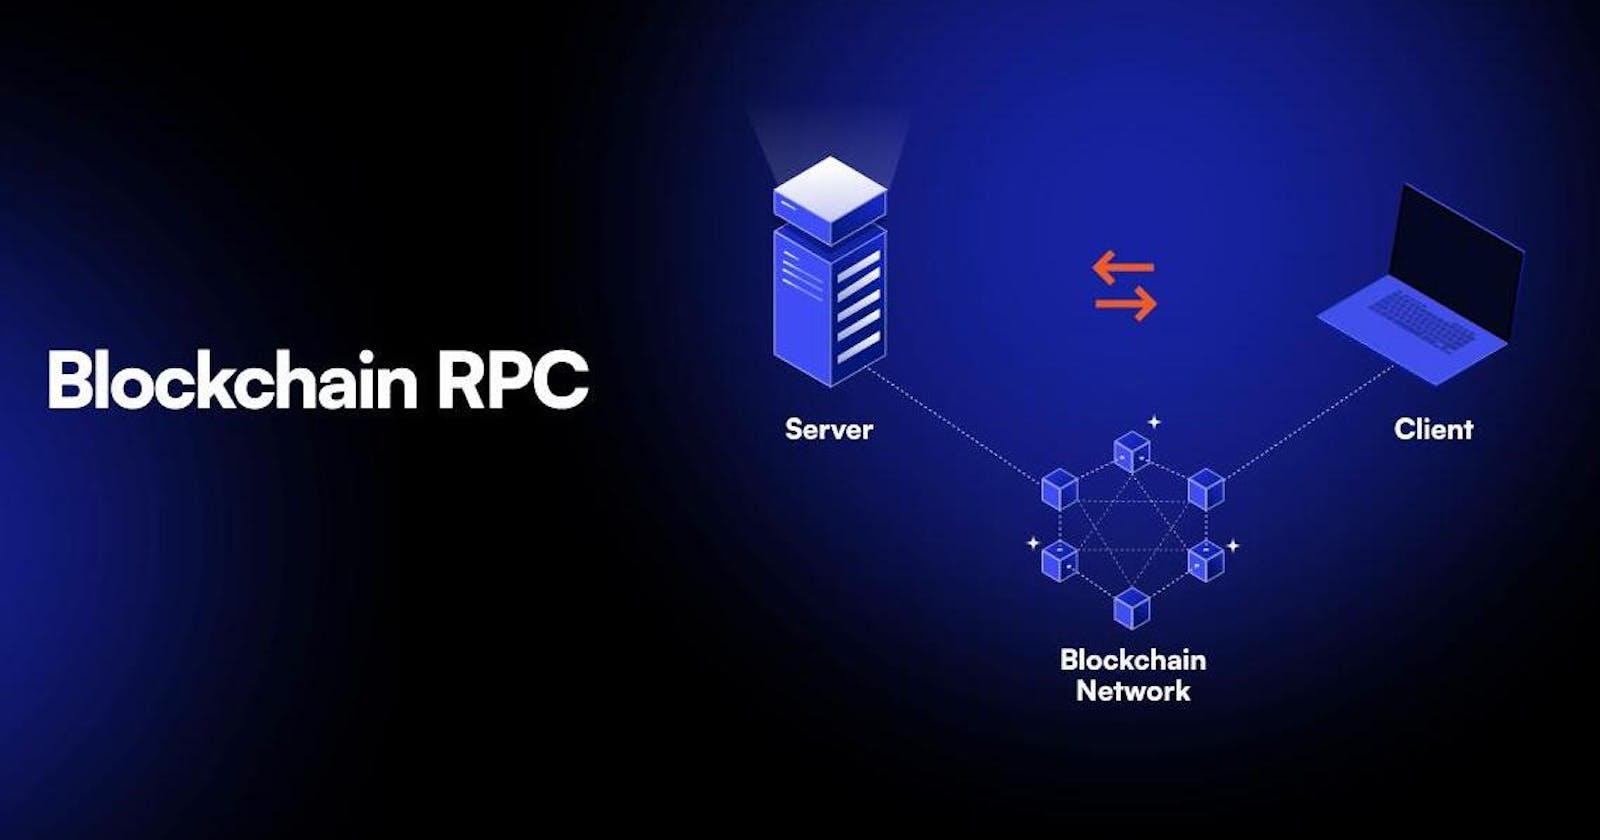 Creating a Blockchain: Part 7 - RPC Protocol